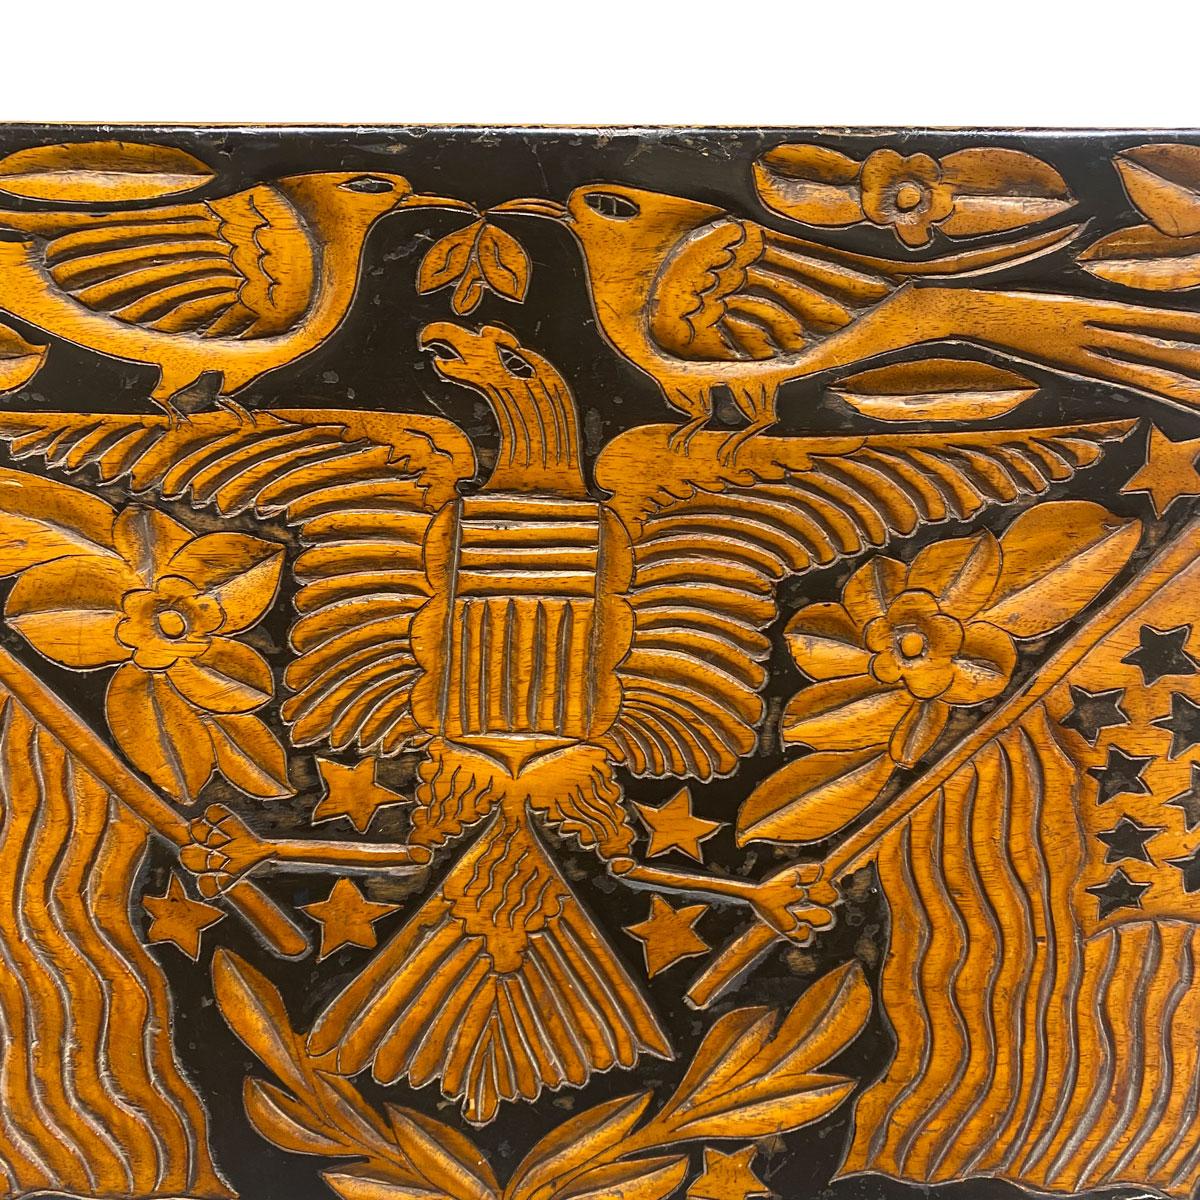 The carved Mahogany panel has a centering eagle clutching two American flags with two birds, stars and floral motifs, most likely a centennial and part of a larger interior panel. American, c.1870-1880,

